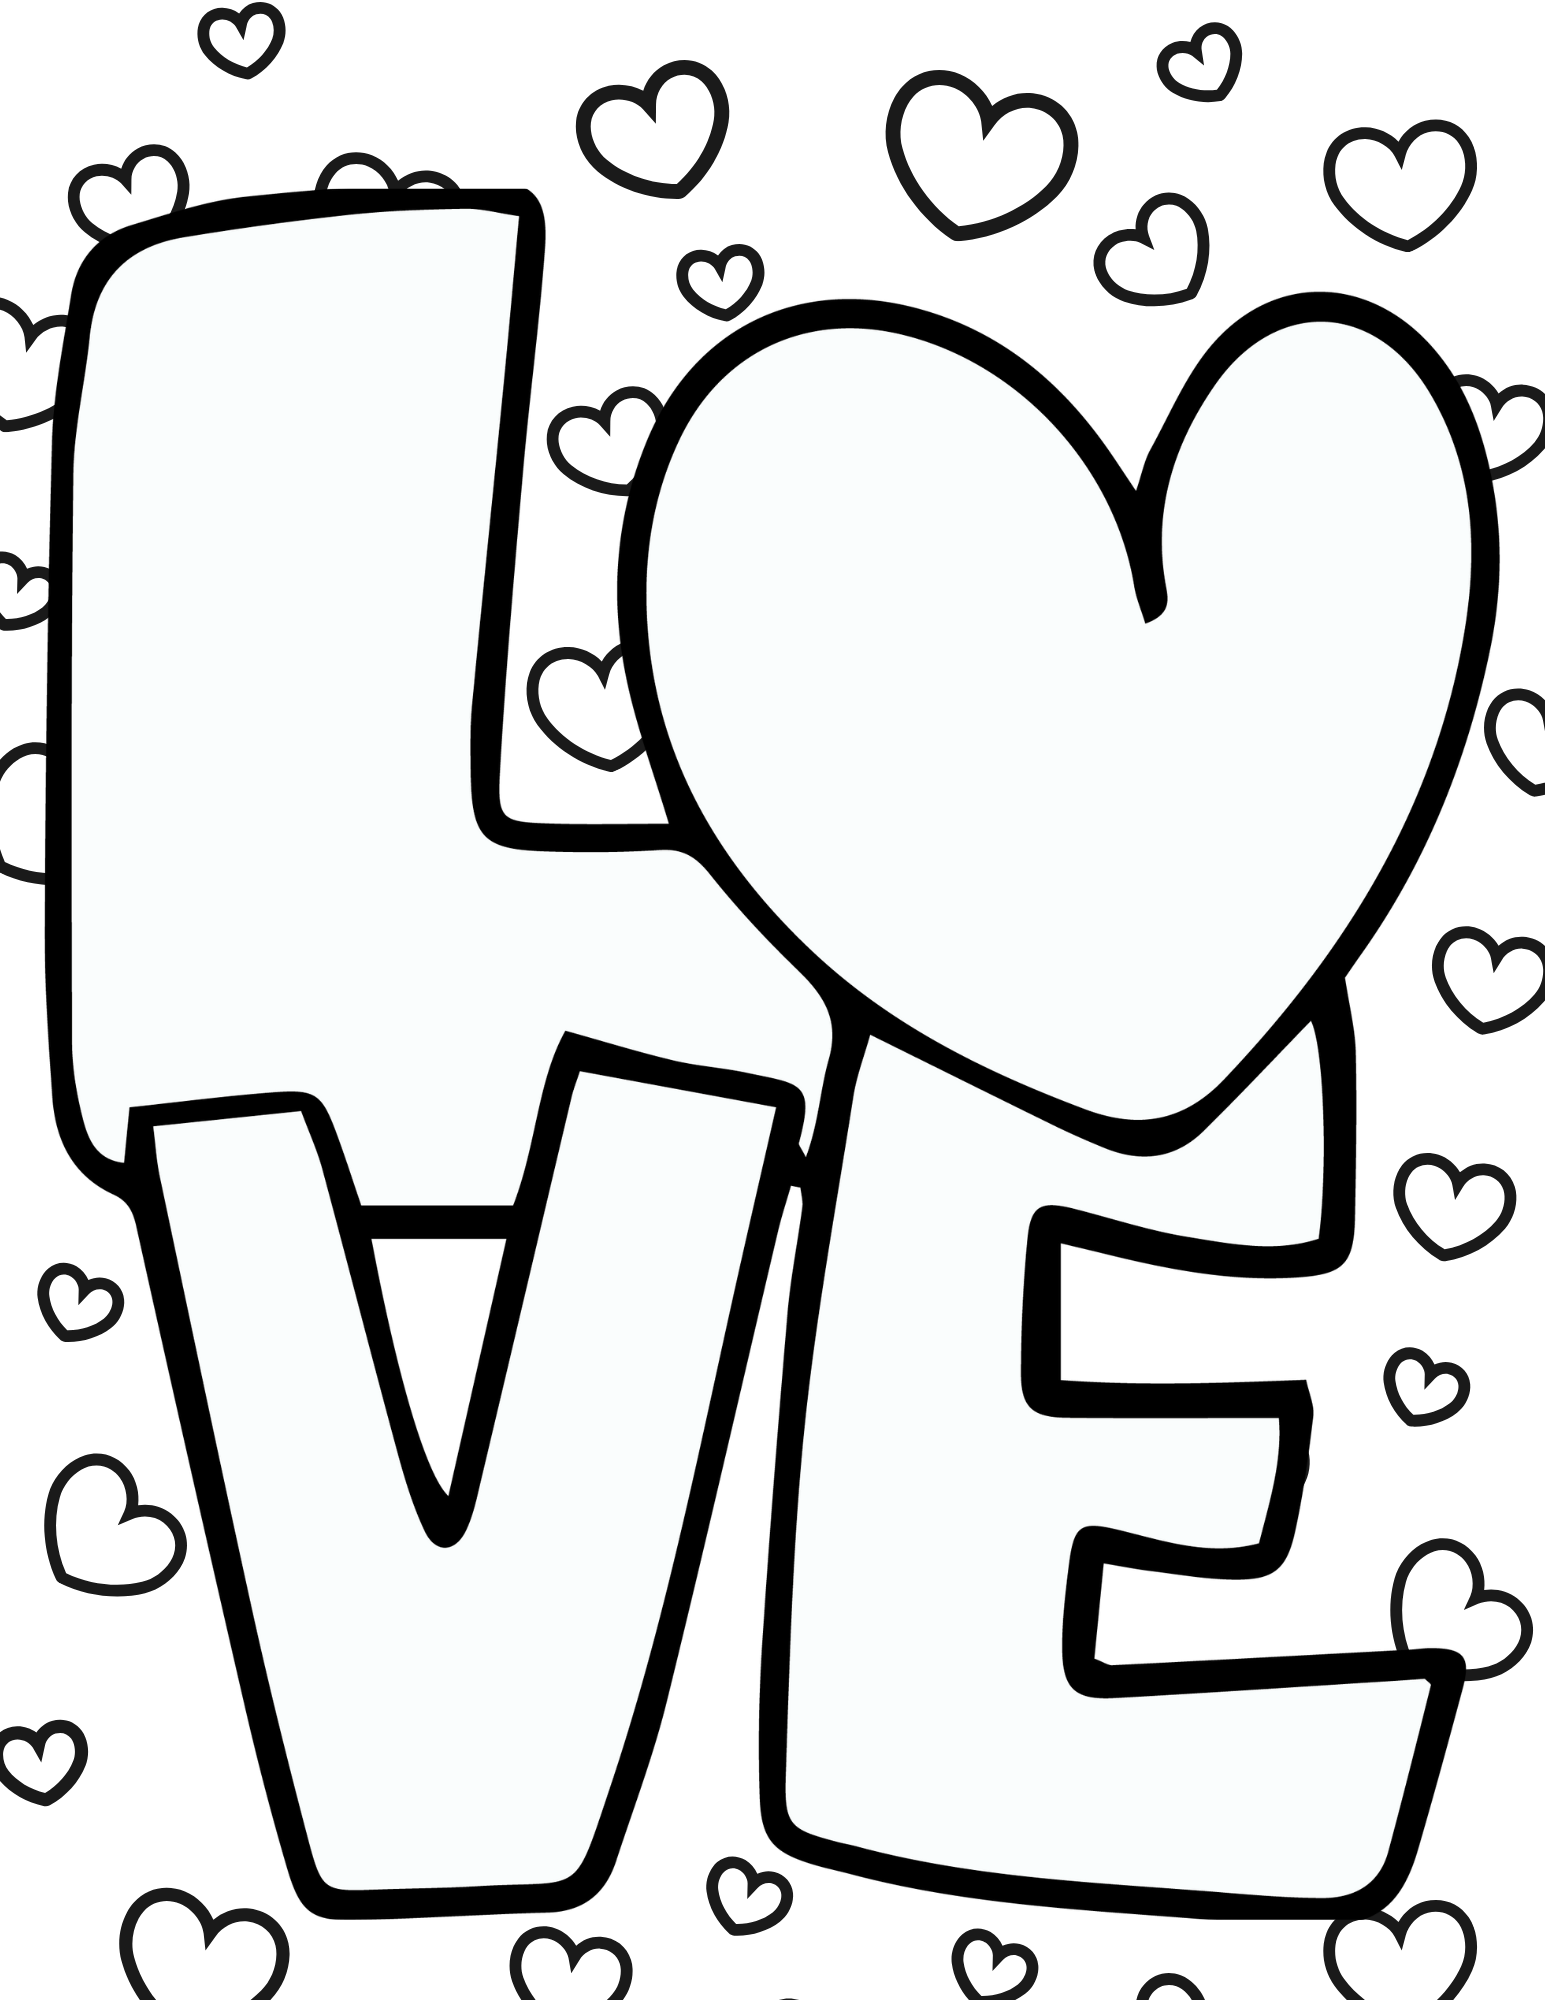 Free printable love coloring pages for kids and adults